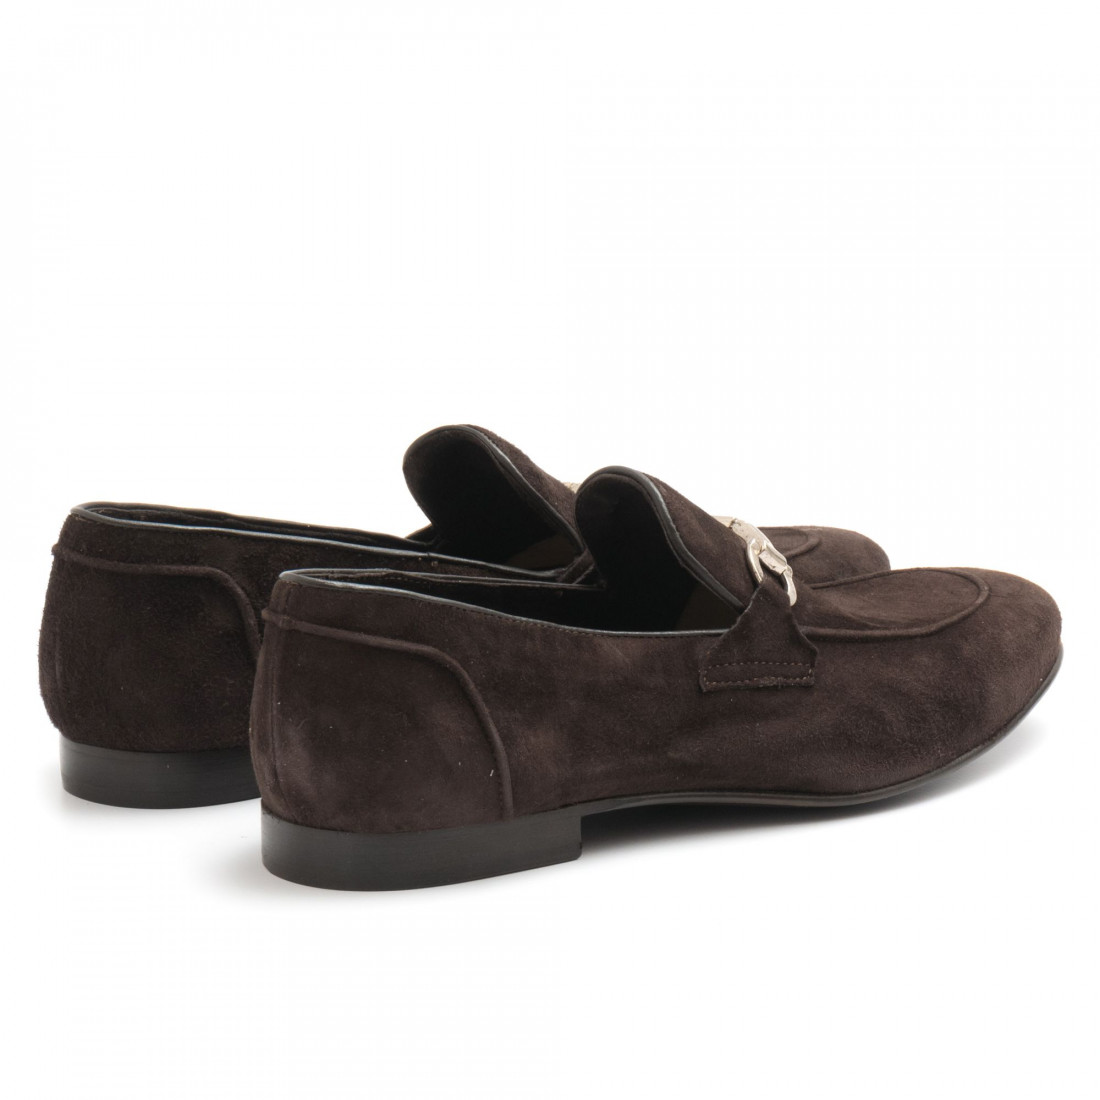 Dark brown soft suede mocassins with metal clamps